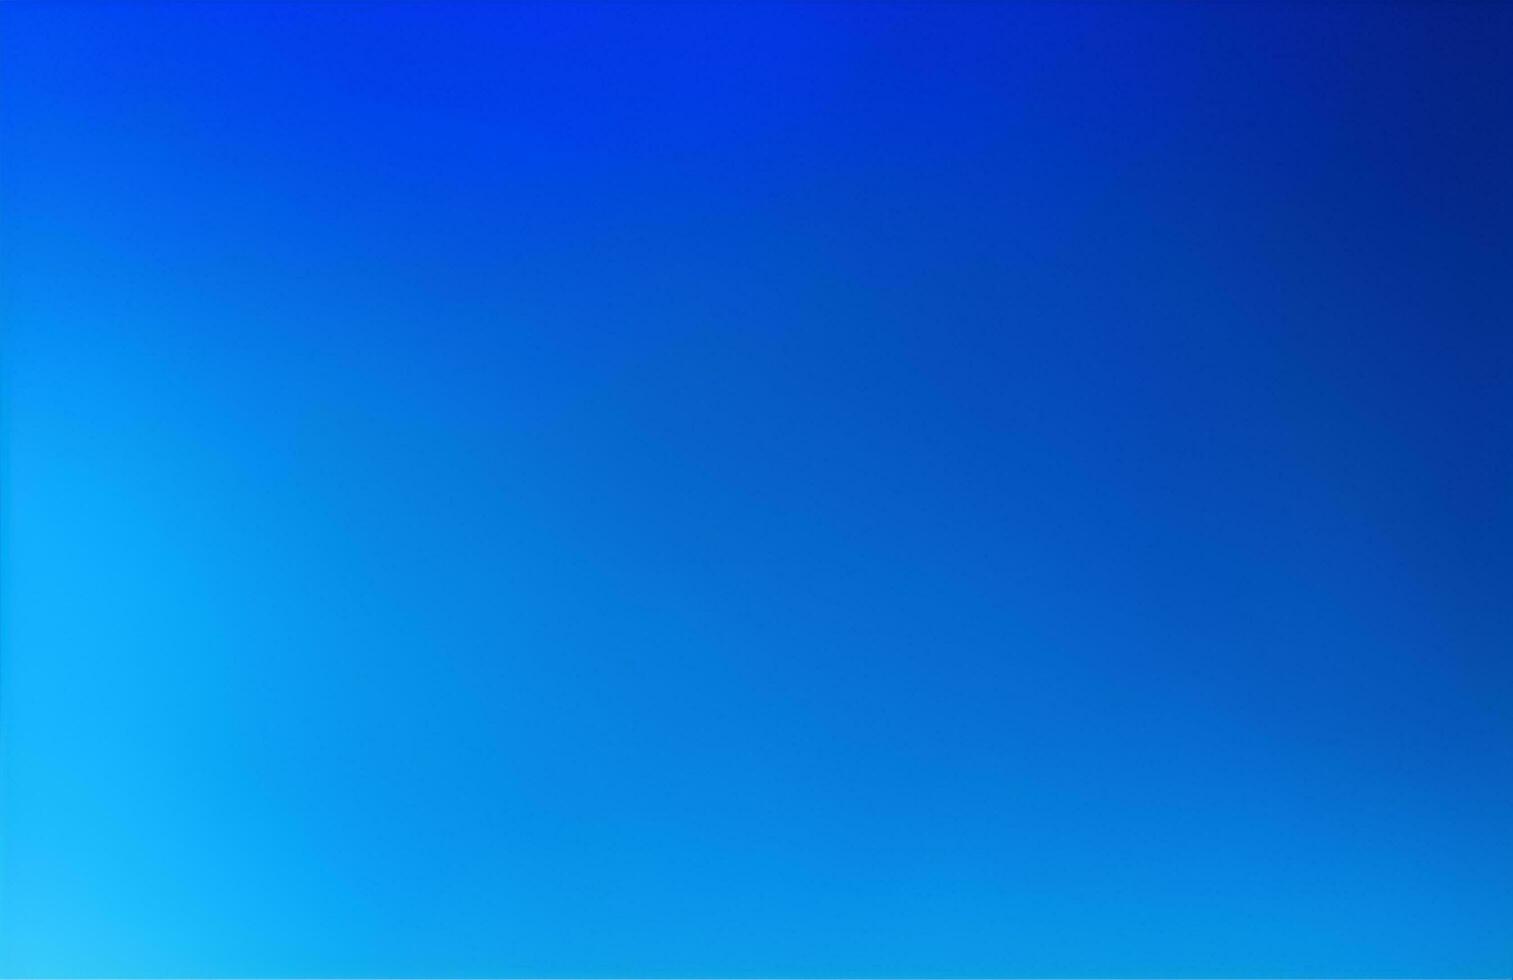 Blue and gradient color background image photo